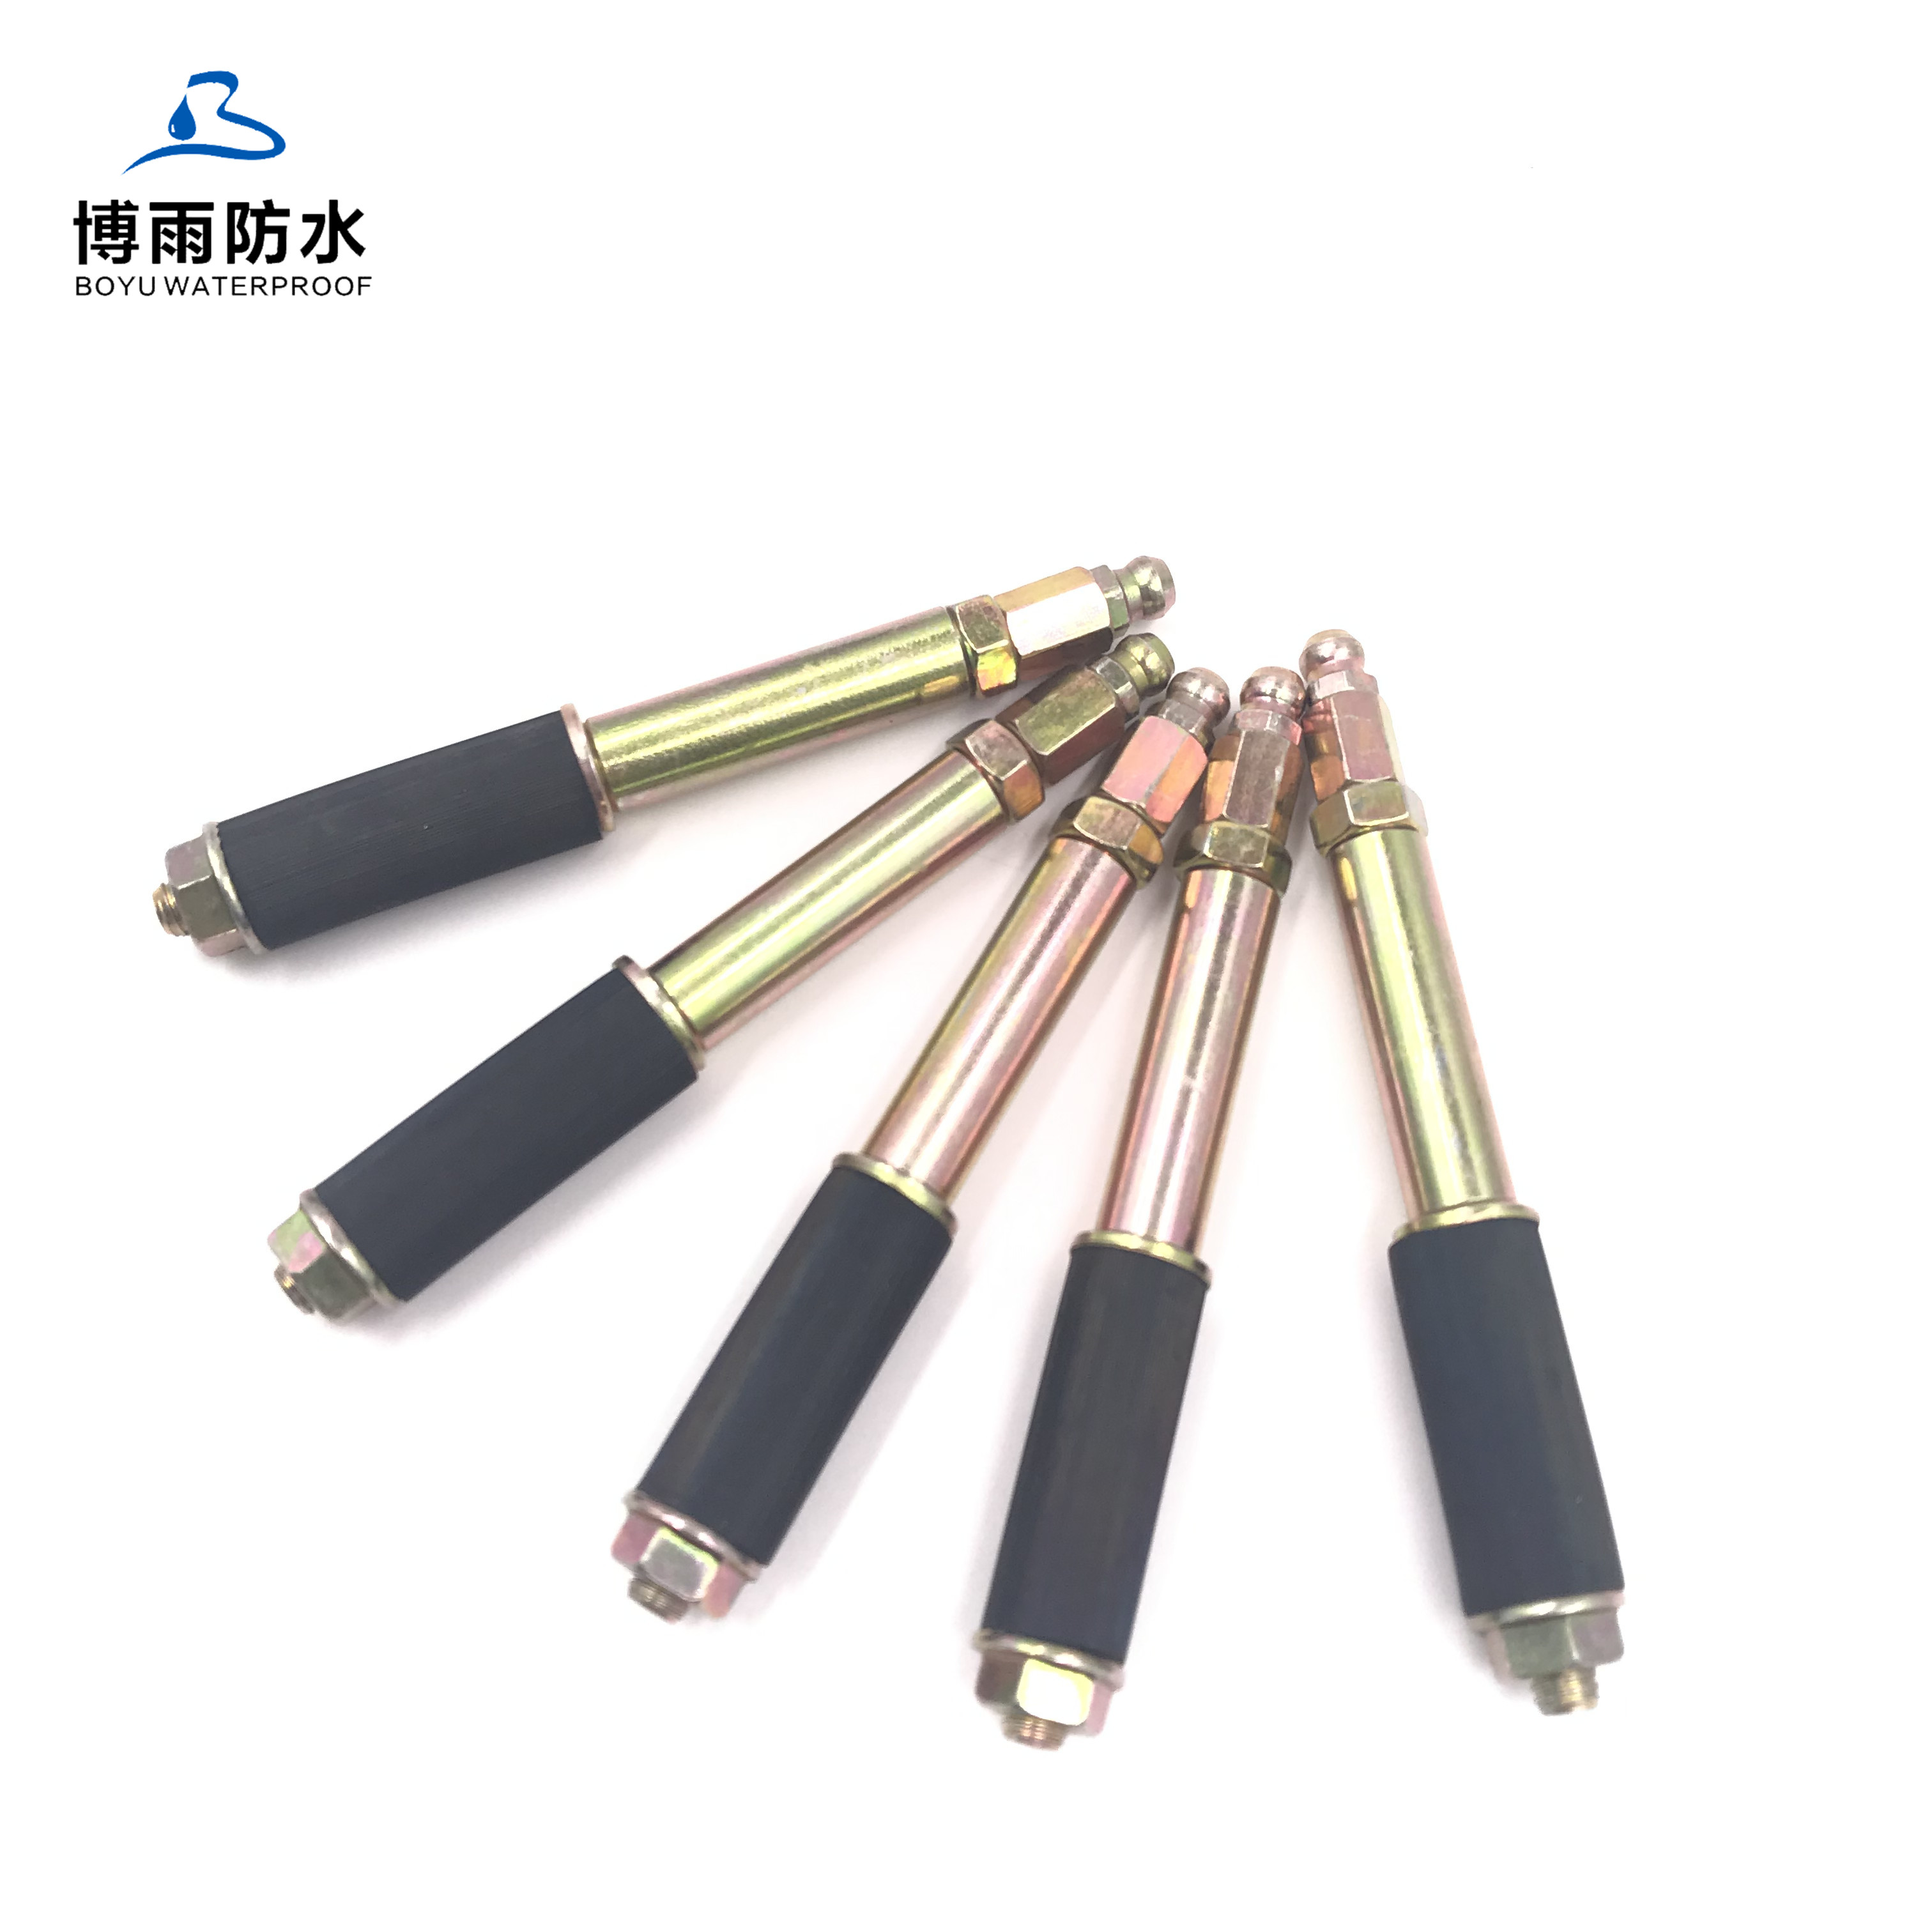 Brass color Injection Packers steel 13*150mm A15 grouting injection packers